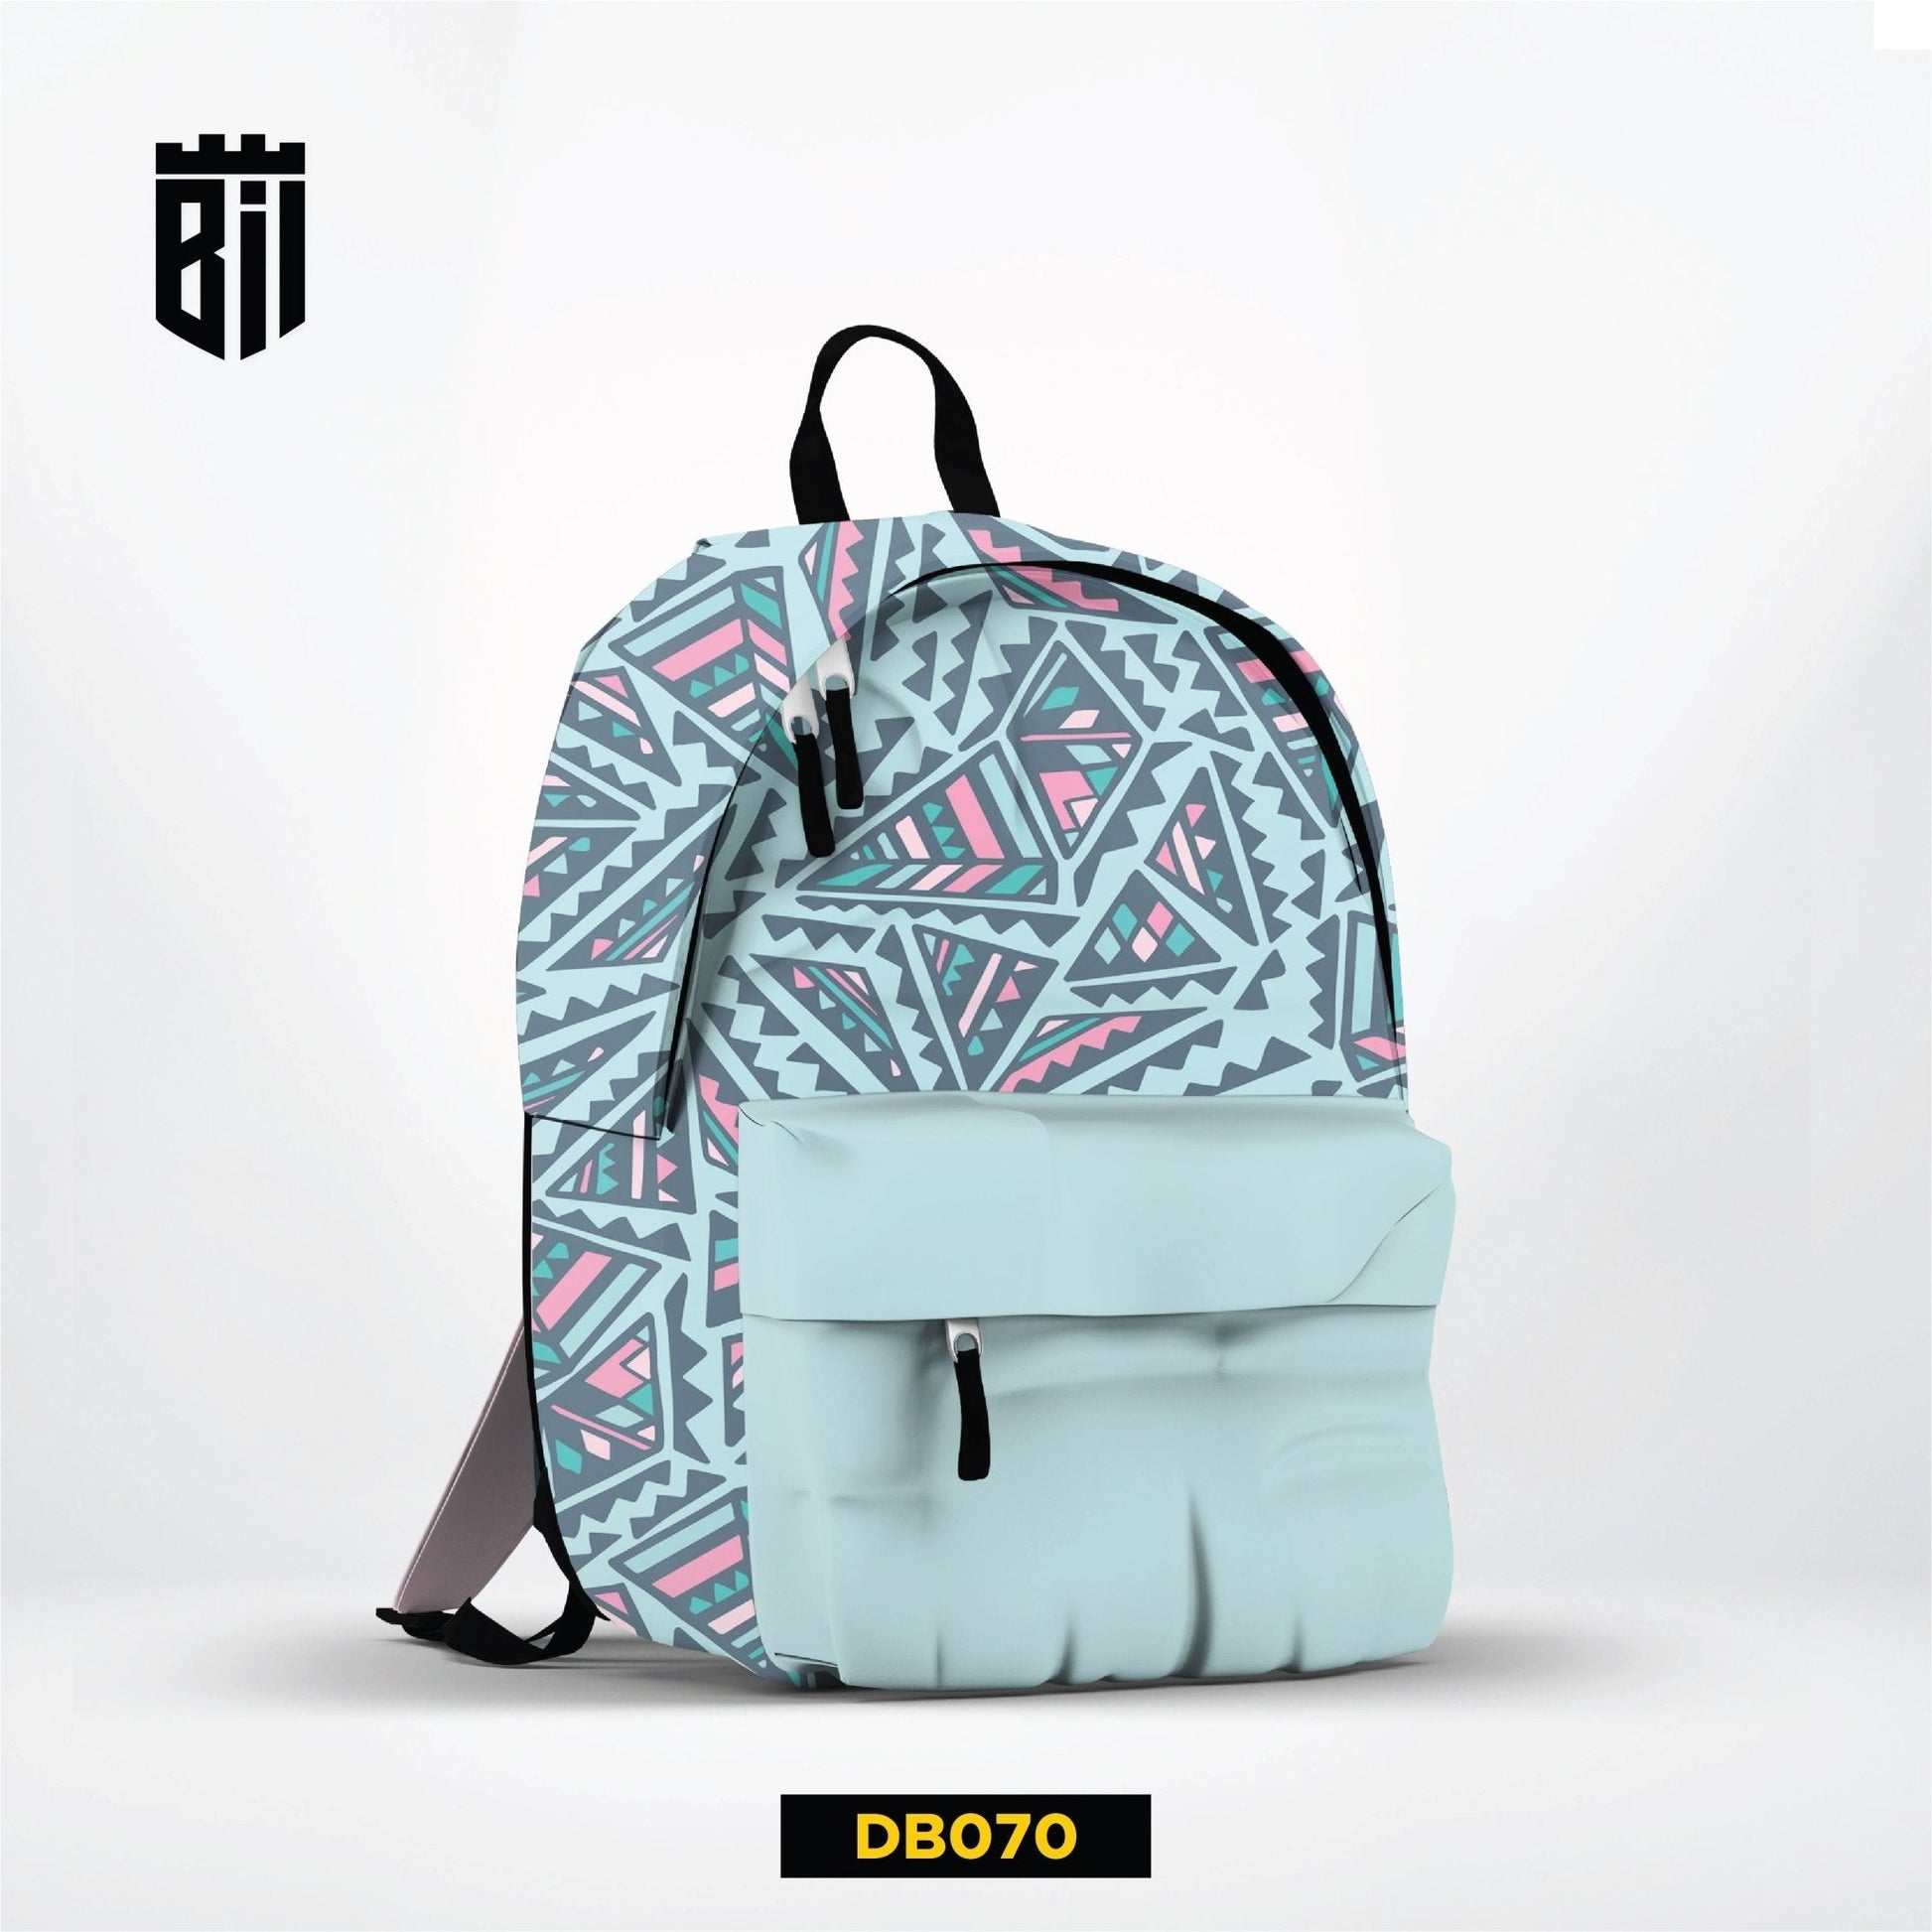 DB070 Blue Abstract Allover Printed Backpack - BREACHIT